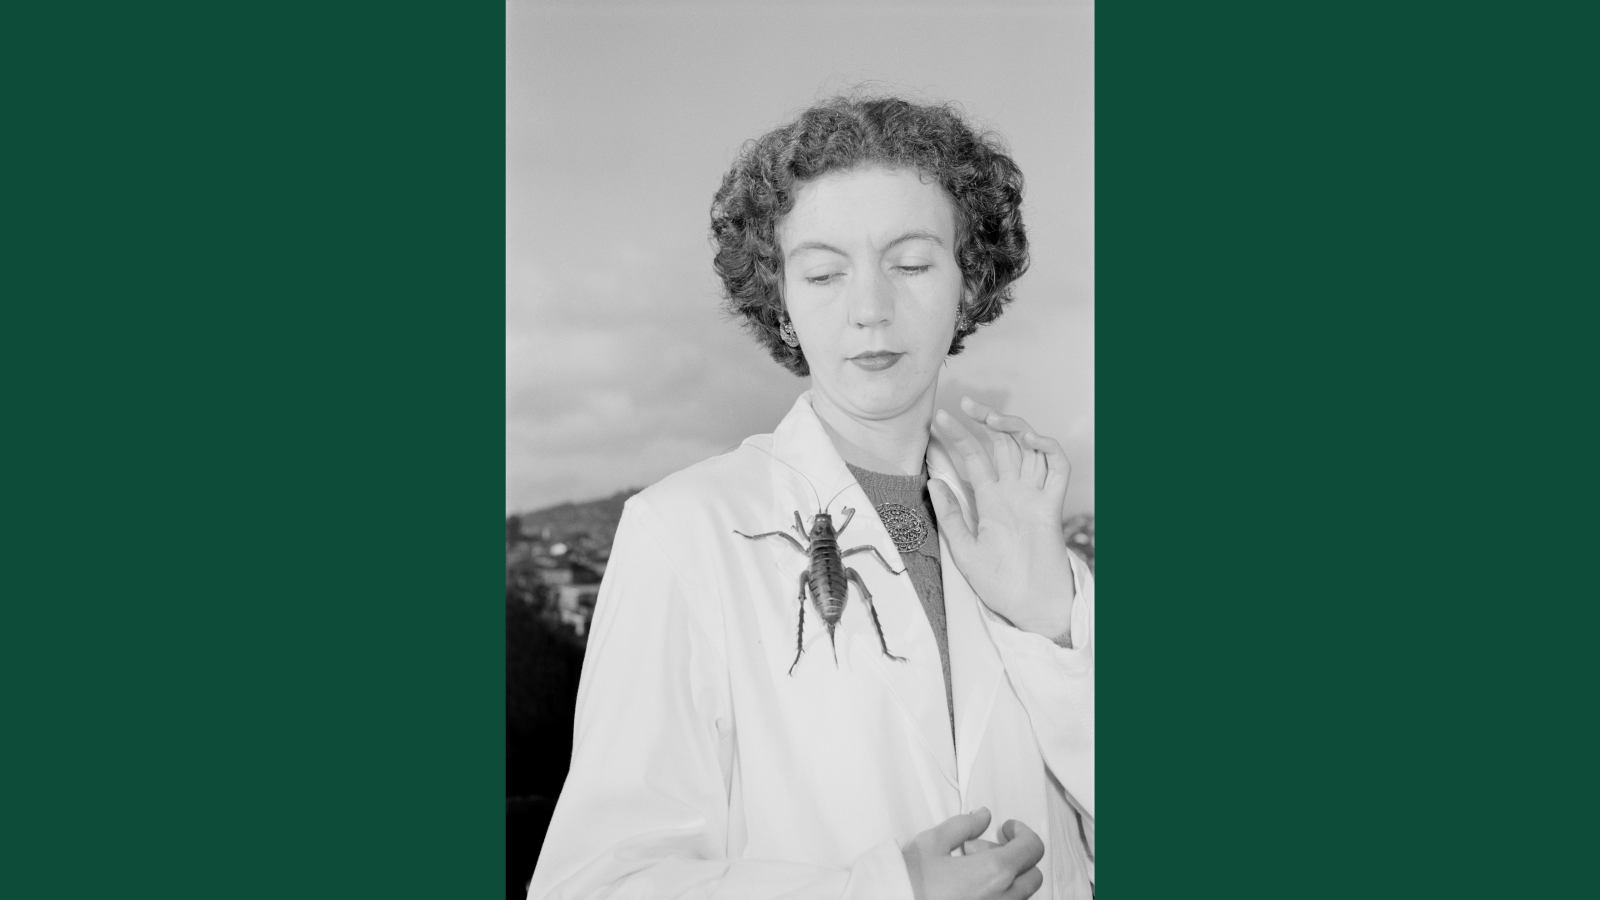 Dr Aola Richards in a white lab coat with a giant wētā on her chest.